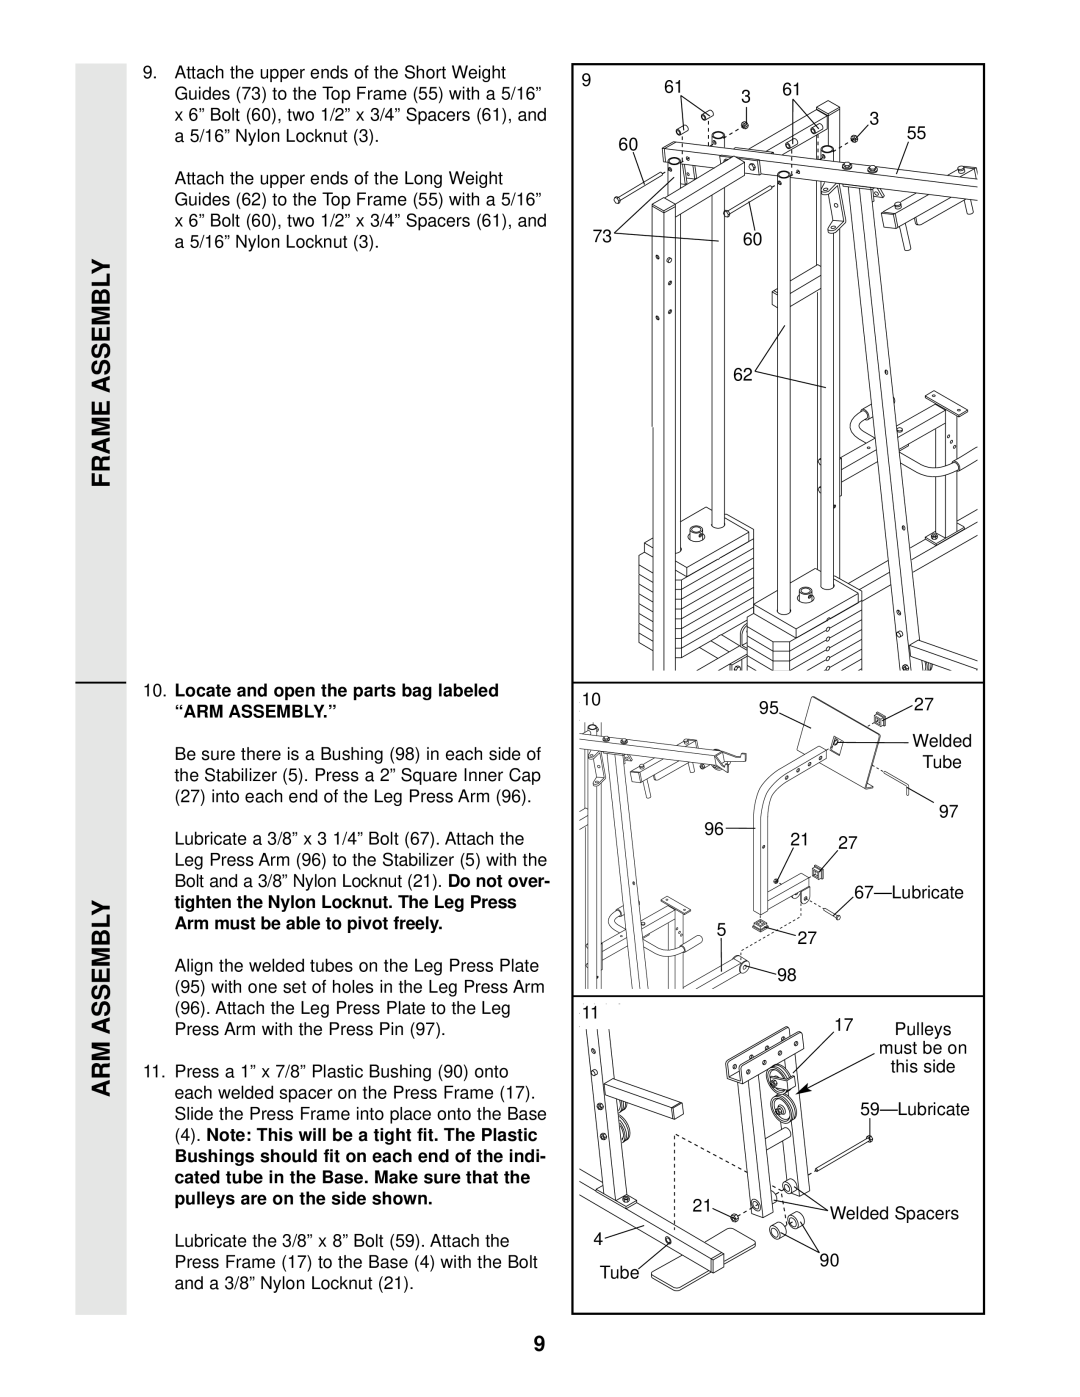 Weider WESY96400 user manual Frame Assembly Arm Assembly, Locate and open the parts bag labeled, “Arm Assembly.” 